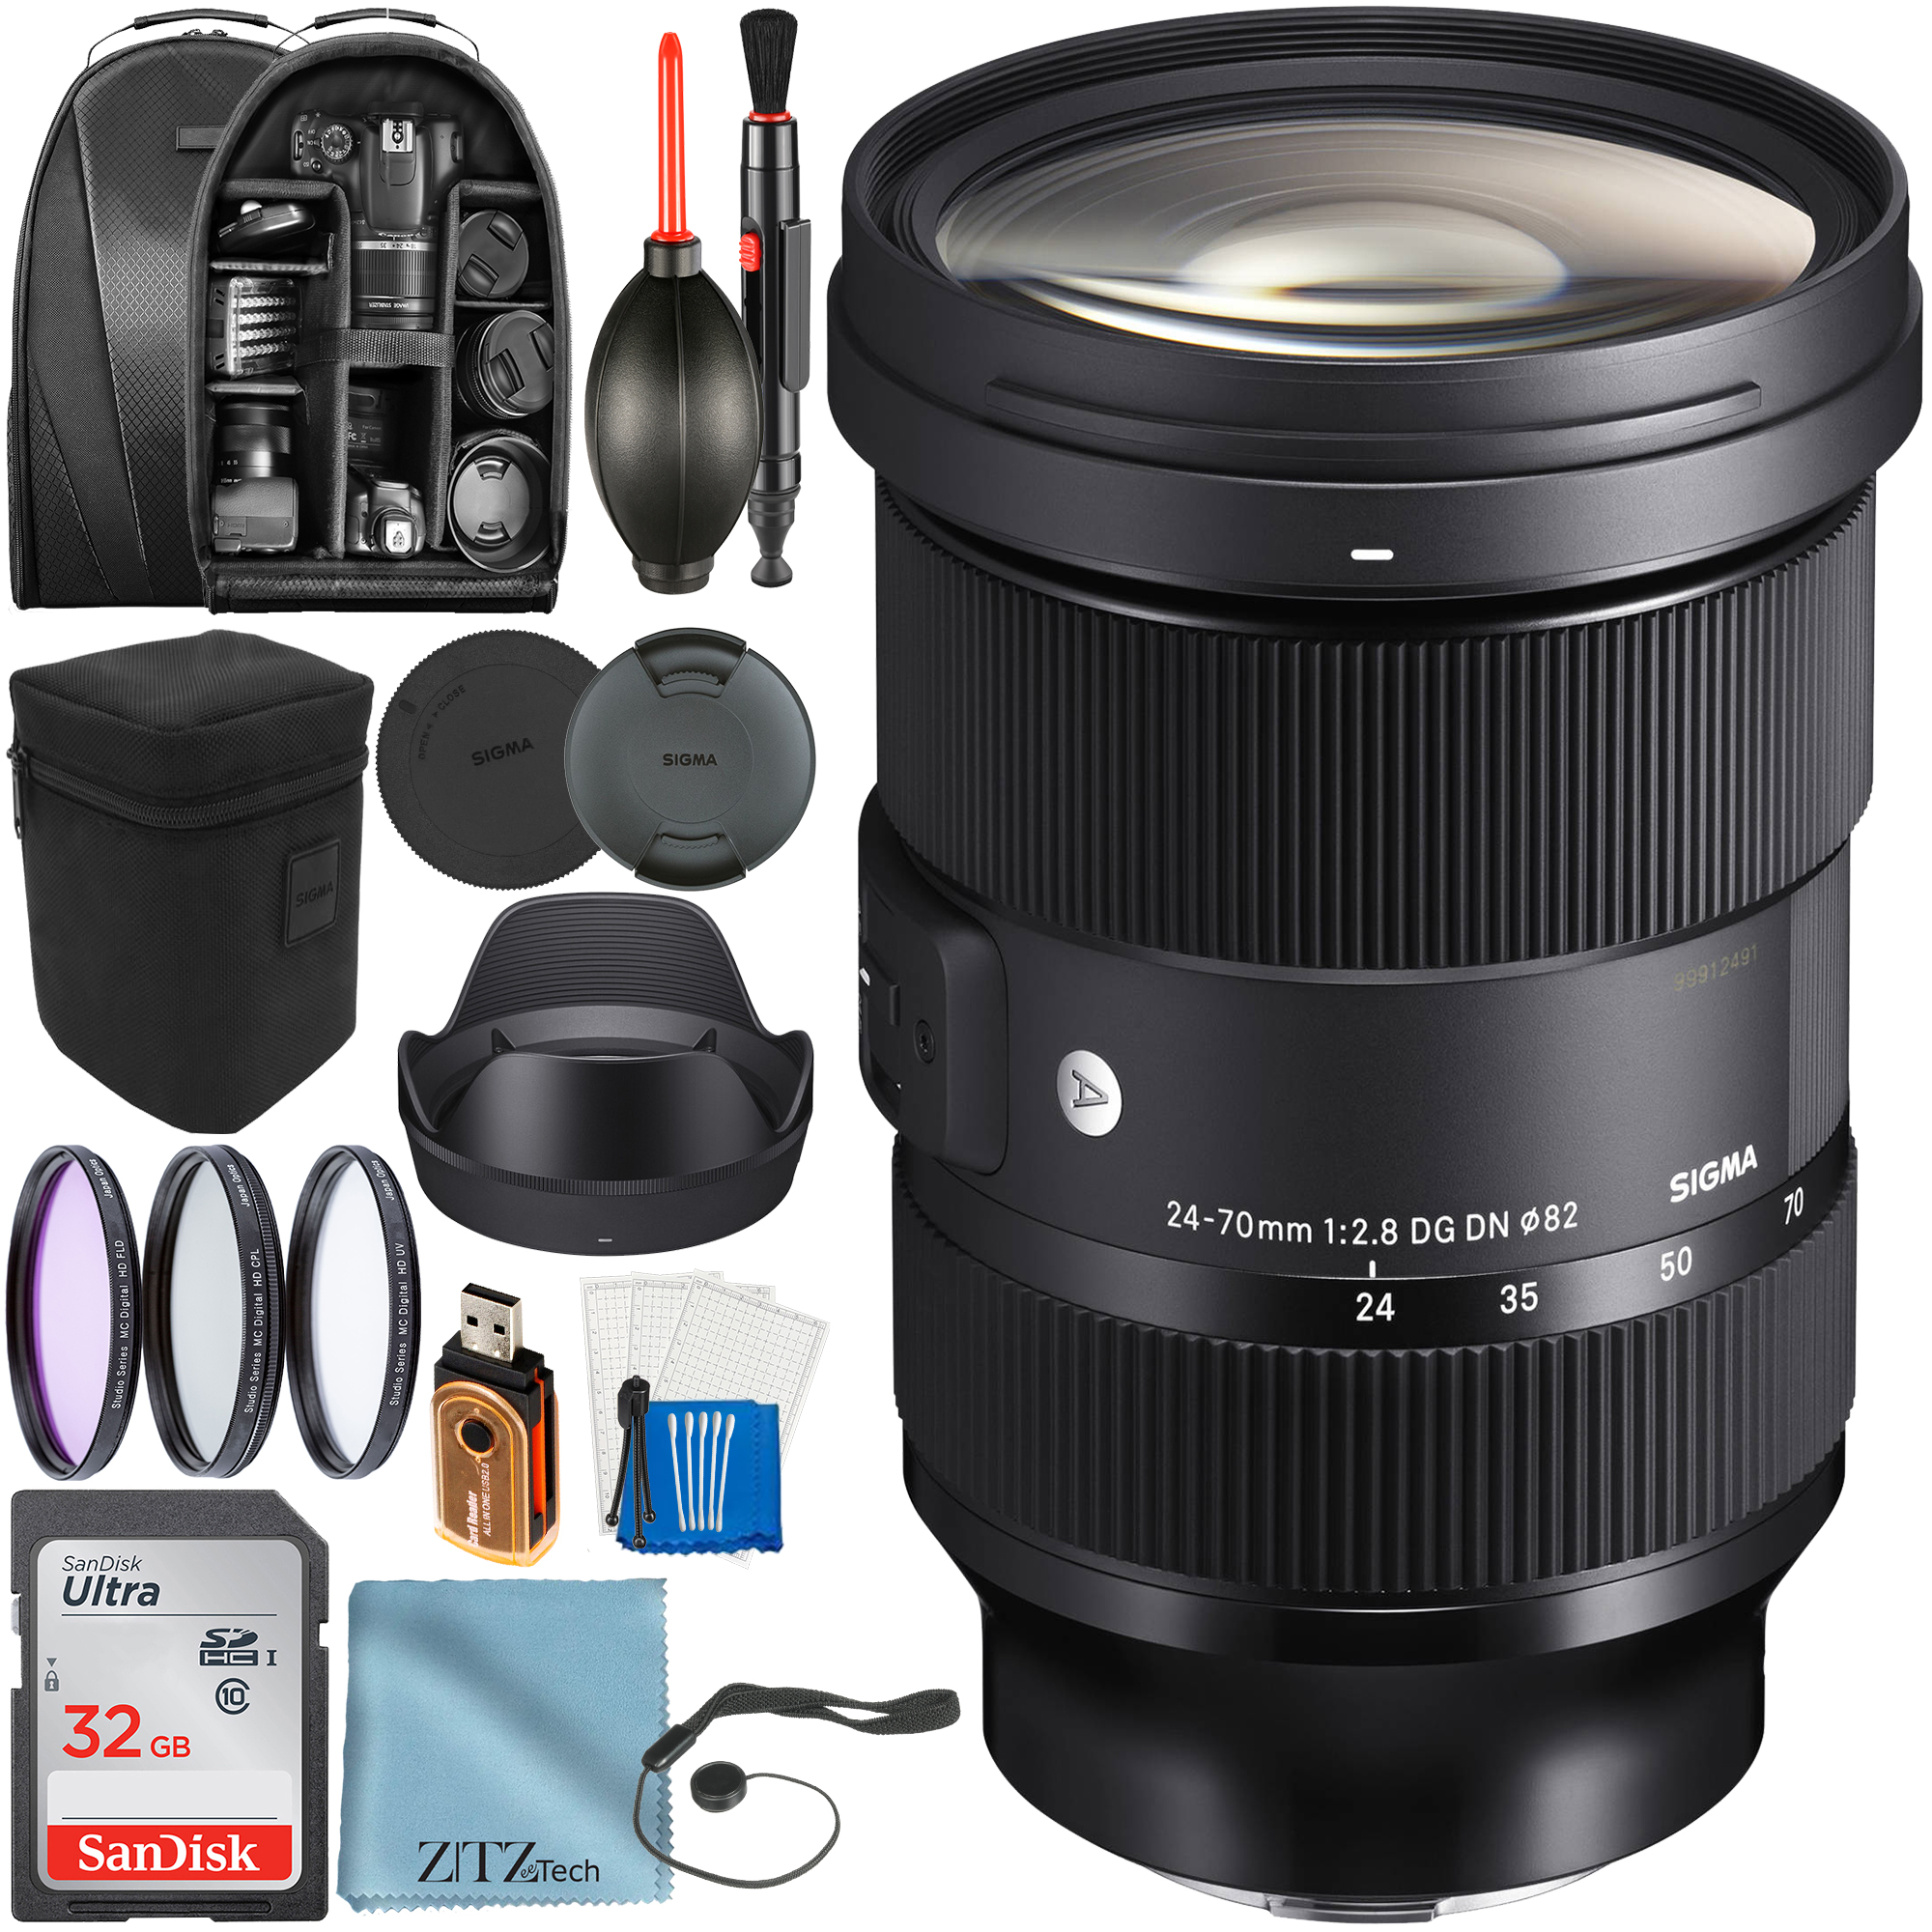 Sigma 24-70mm F/2.8 DG DN Art Lens Sony E-Mount with 32GB SanDisk Card + Backpack + Filter + ZeeTech Accessory Bundle